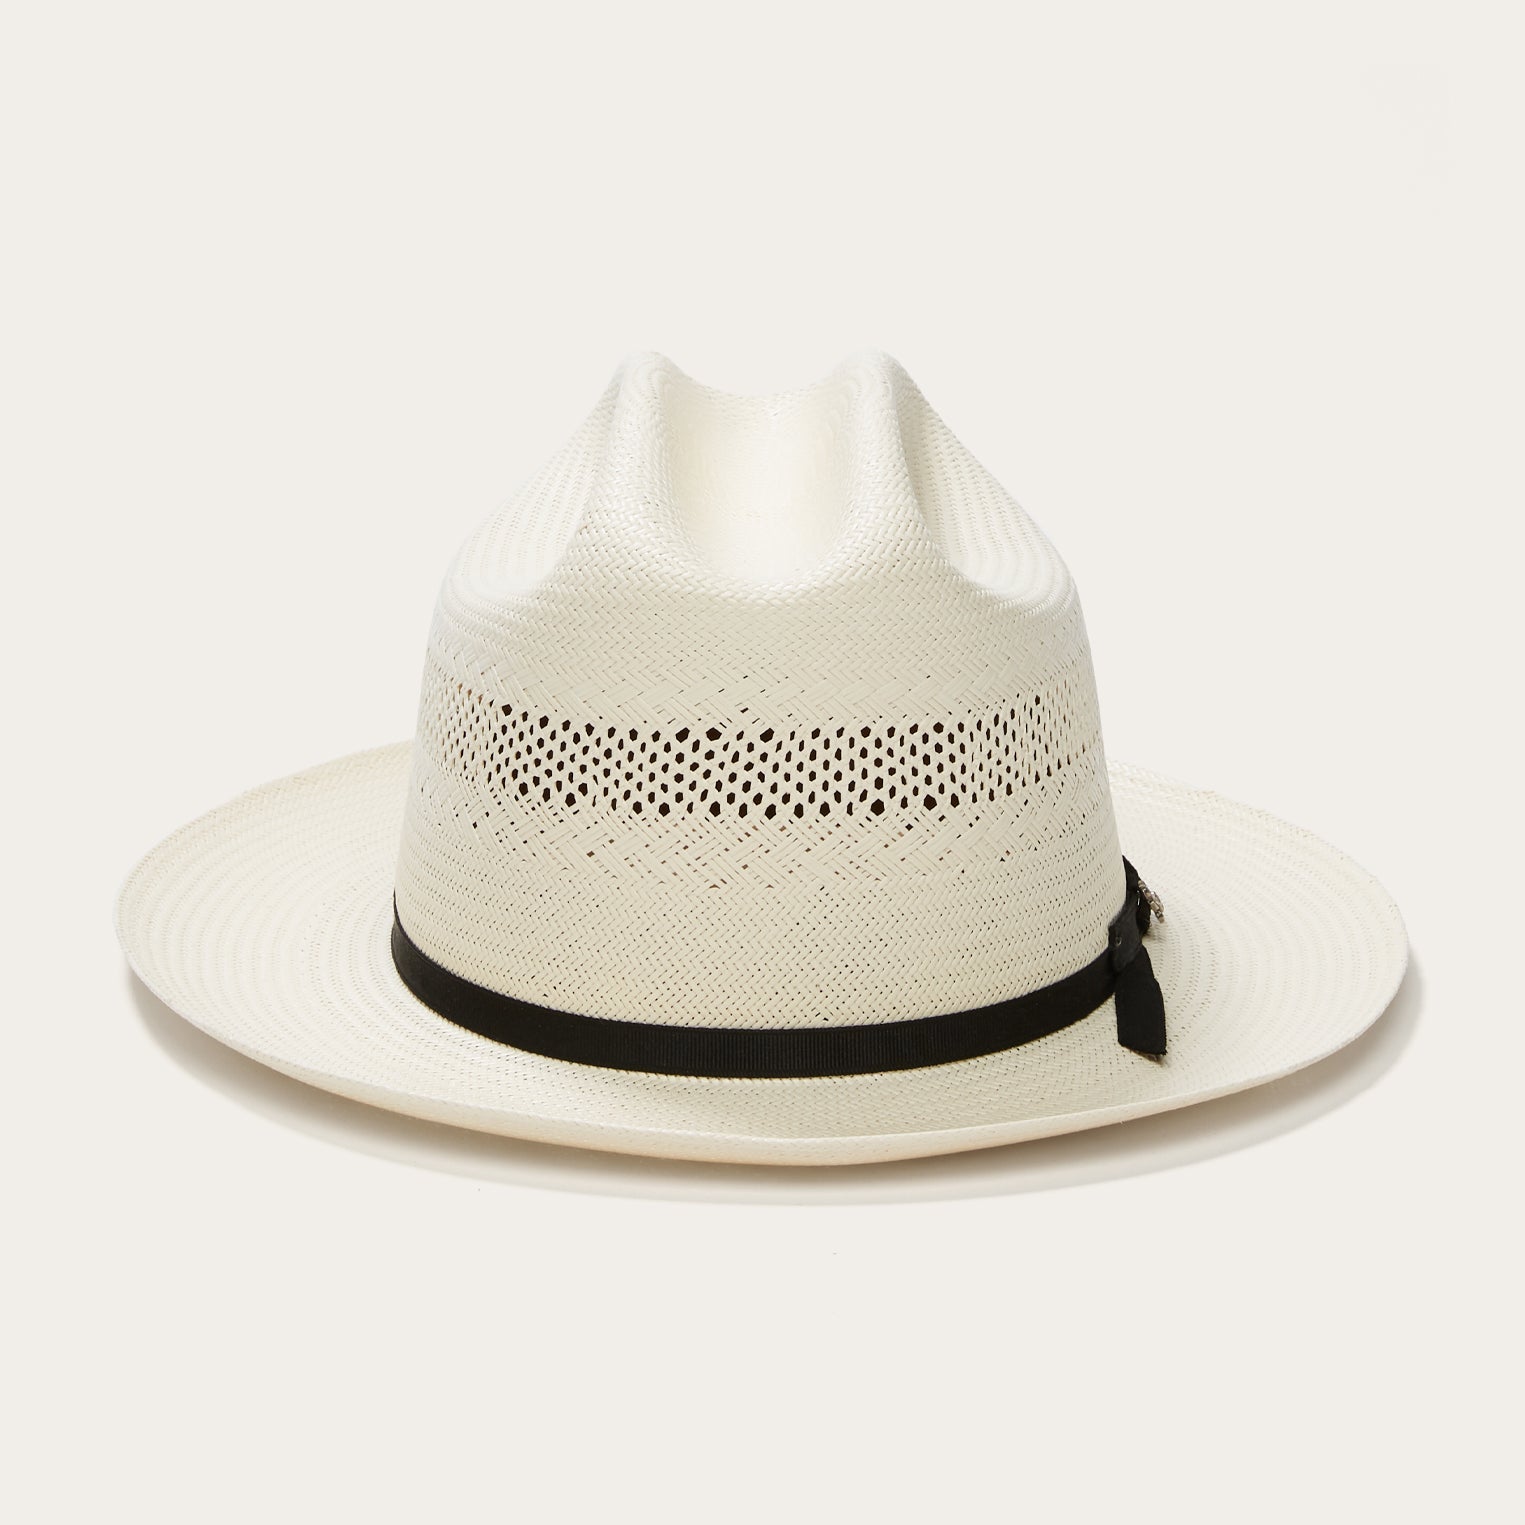 Open Road 10X Straw Vented Cowboy Hat